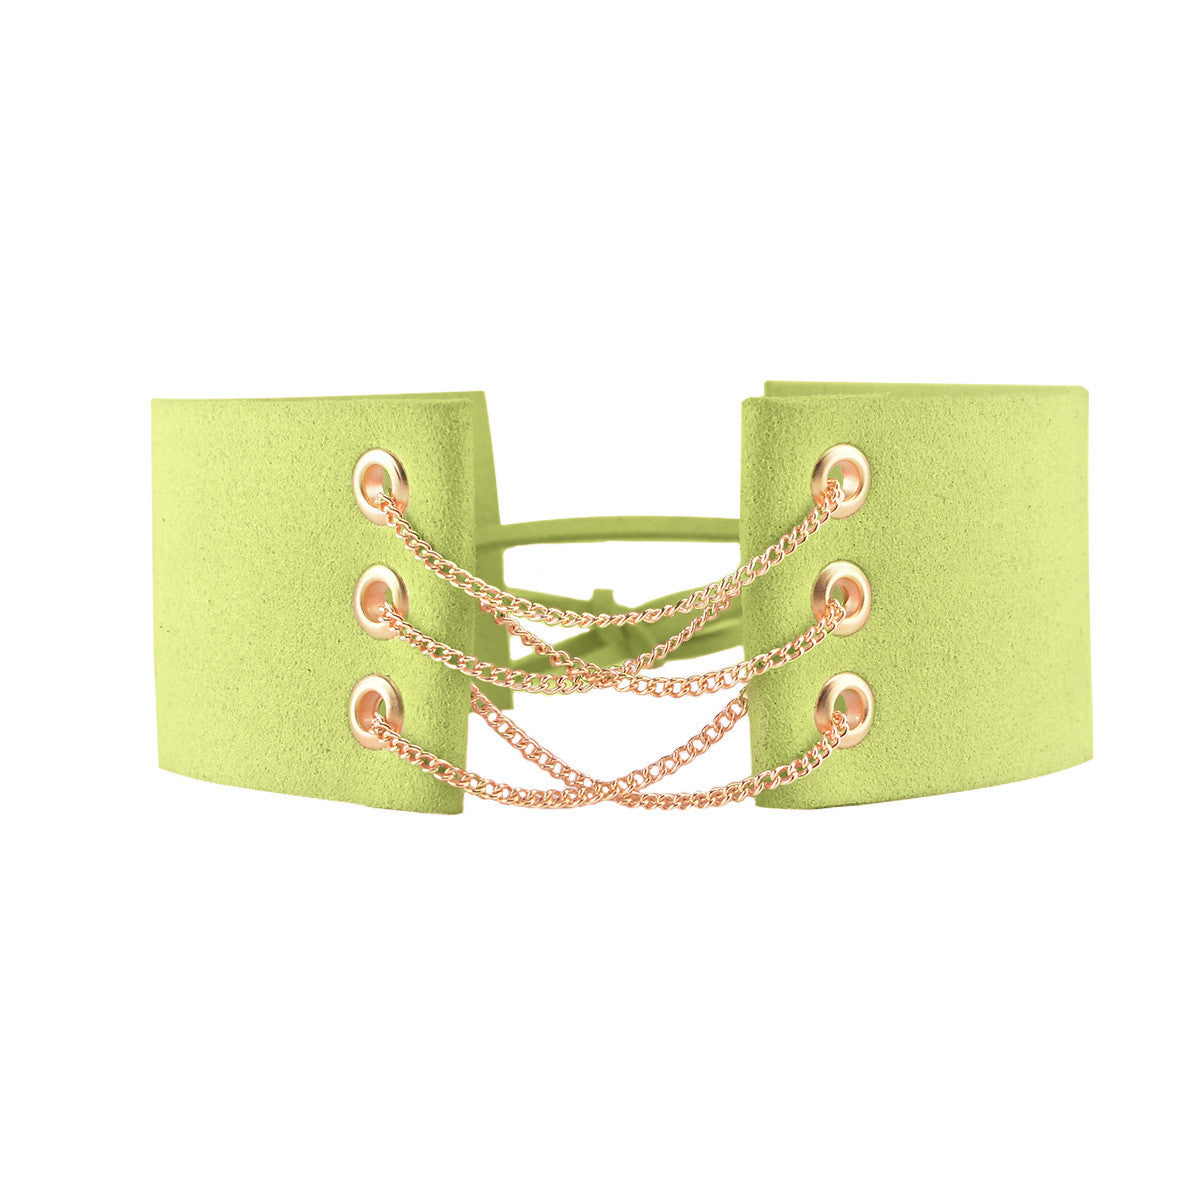 Wide Lint Belt lady's Collars Necklace